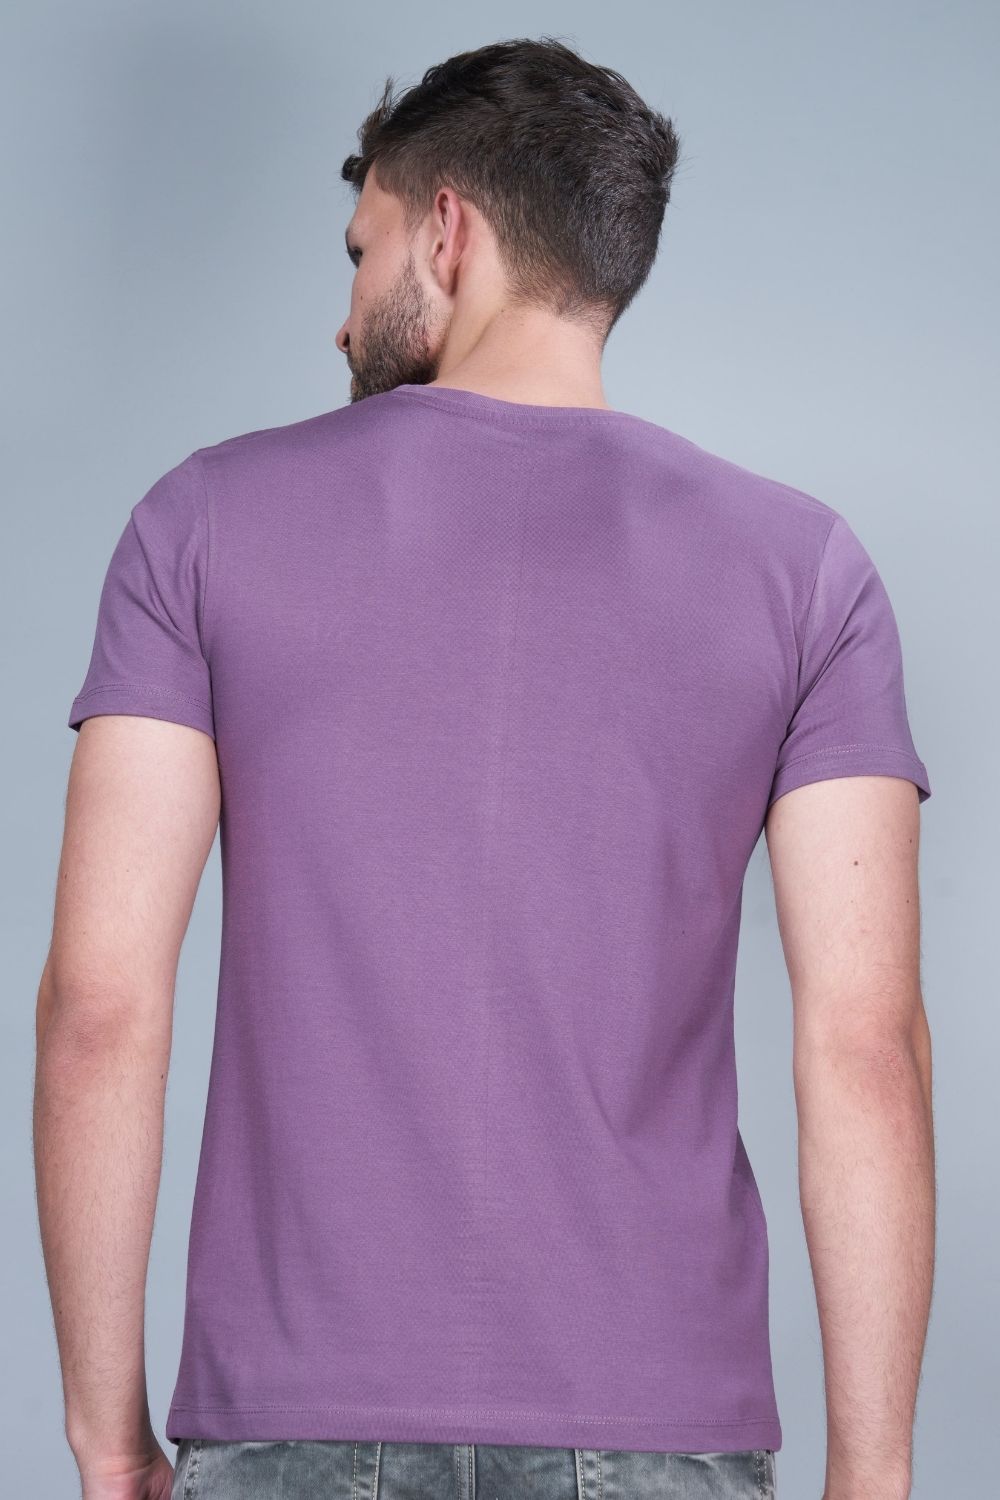 Light maroon colored, Solid T shirt for men, with half sleeves and round neck, back view.